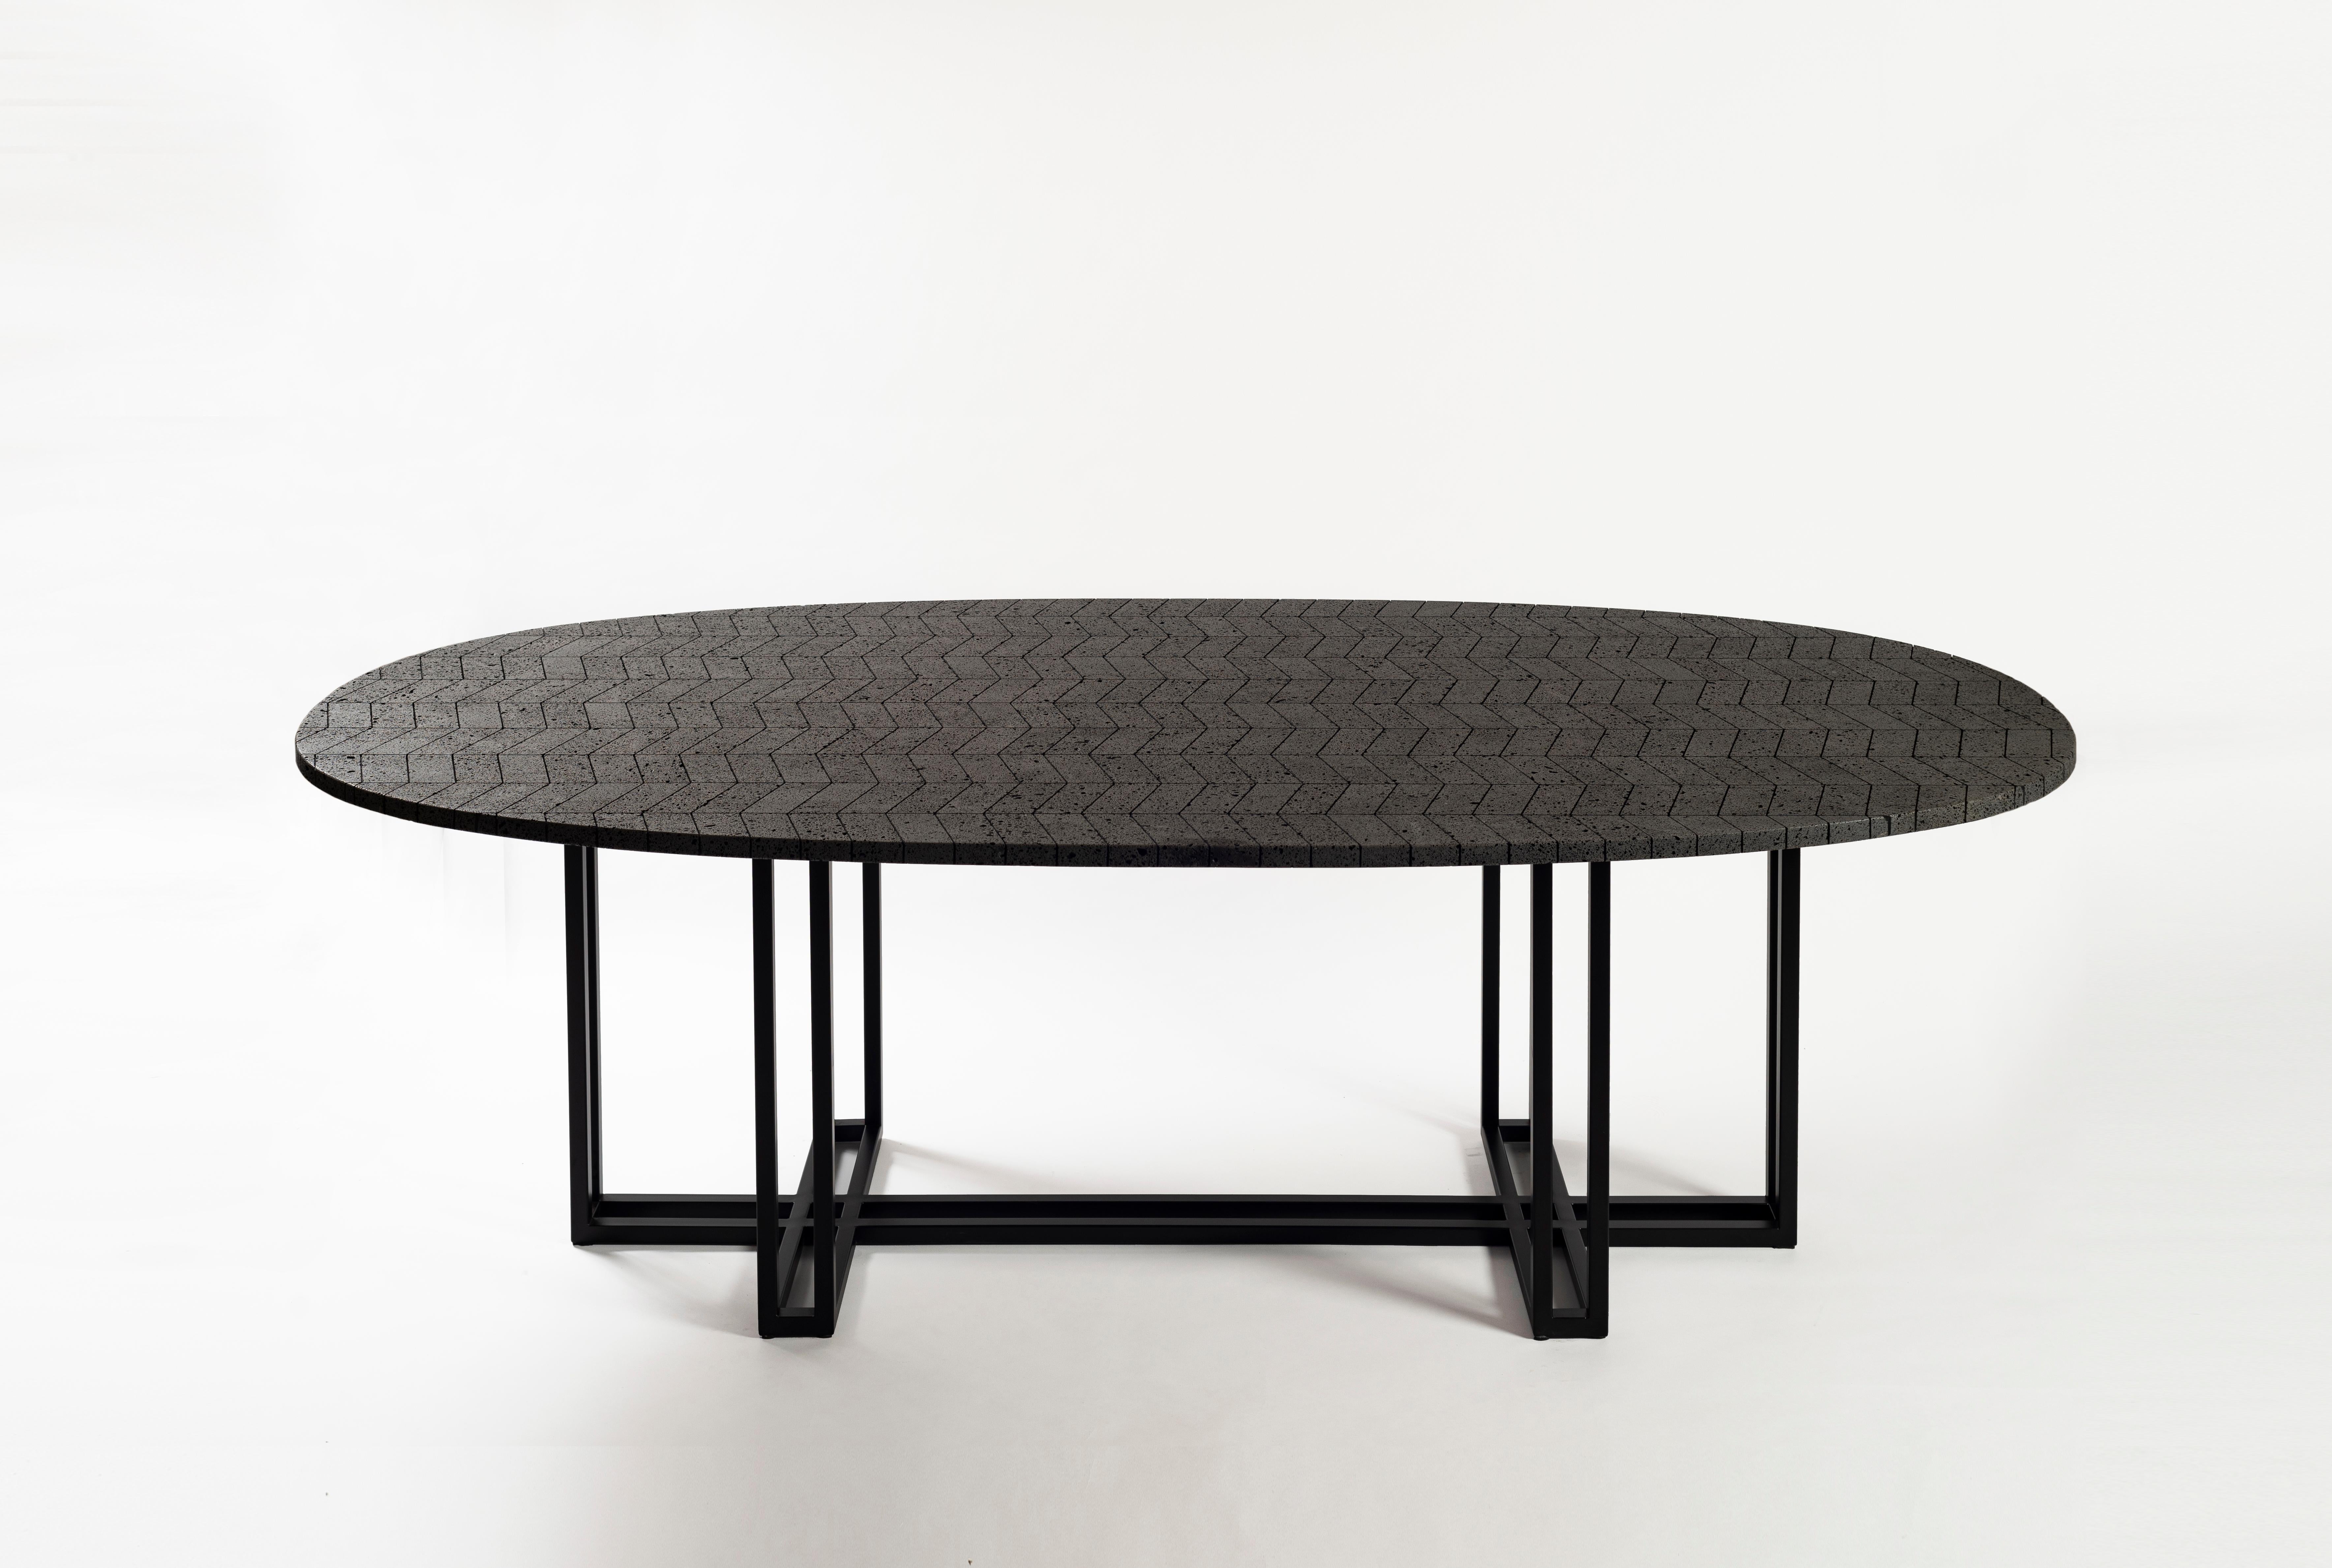 The vast volcanic stone stretches across an oval top featuring a composition of handcut, polished and mounted pieces. The black stainless steel base provides character and strength. This Lava table is ideal for adding its energetic feel to both